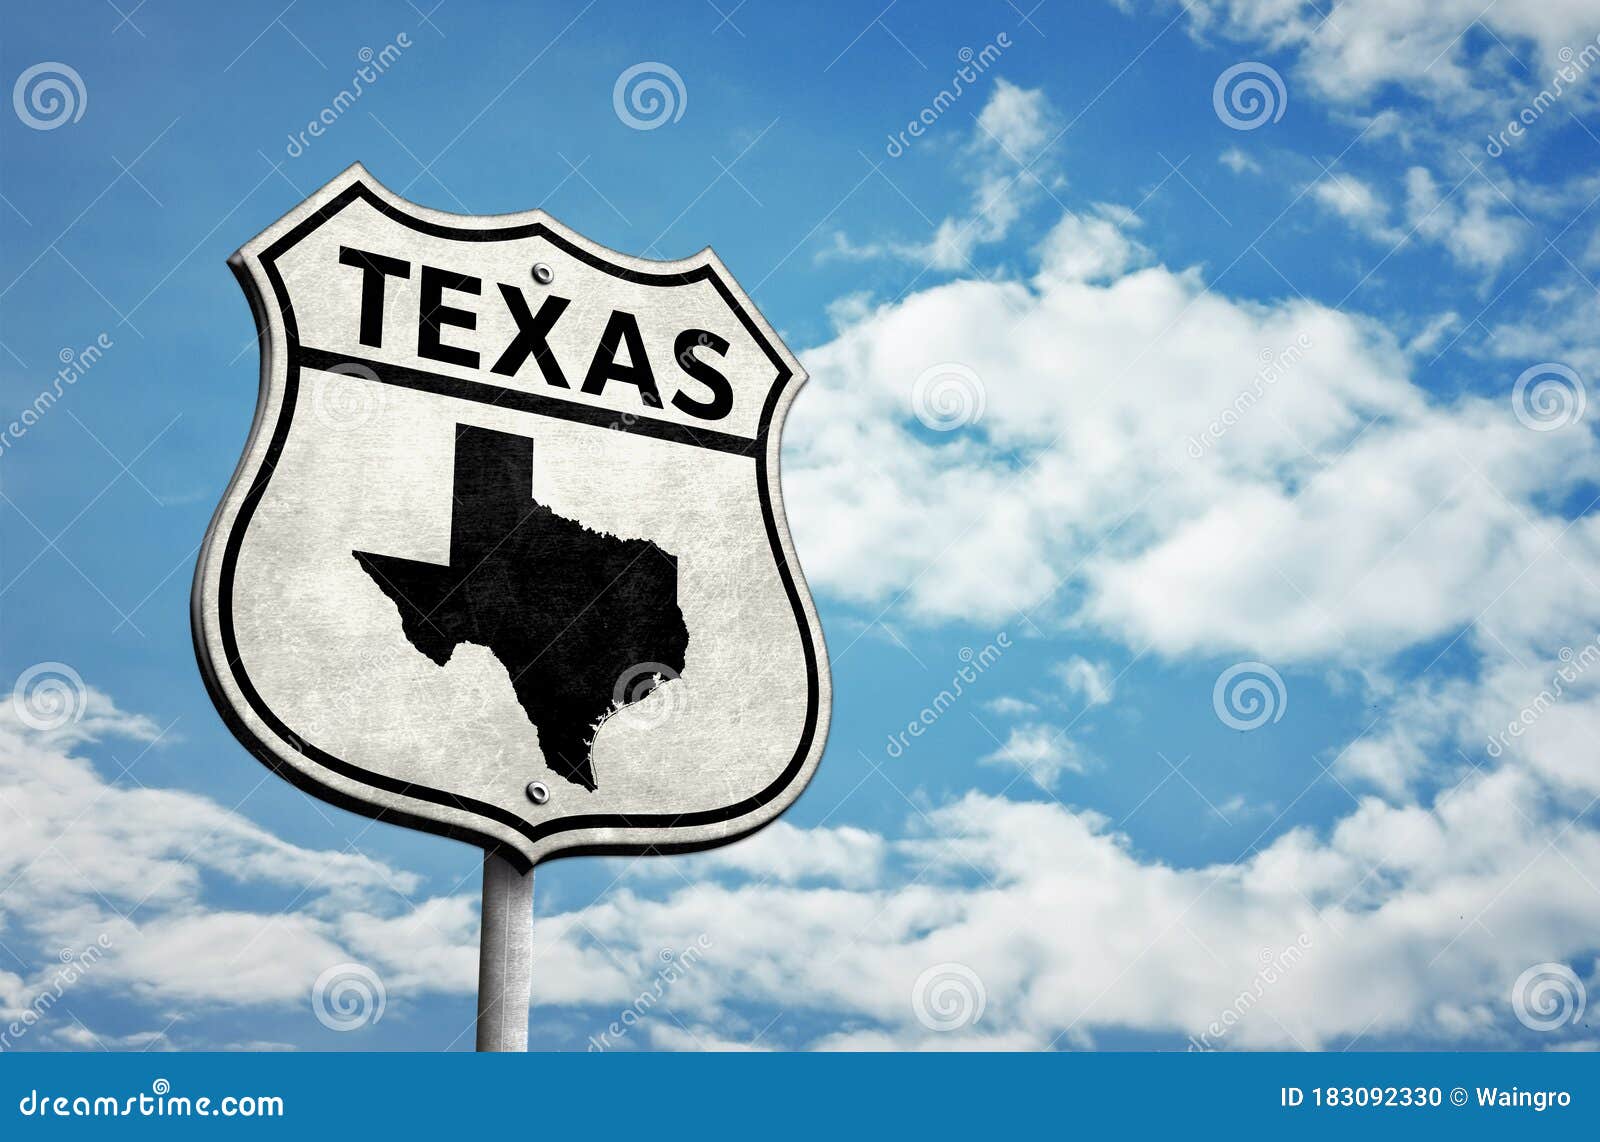 route 66 texas map roadsign